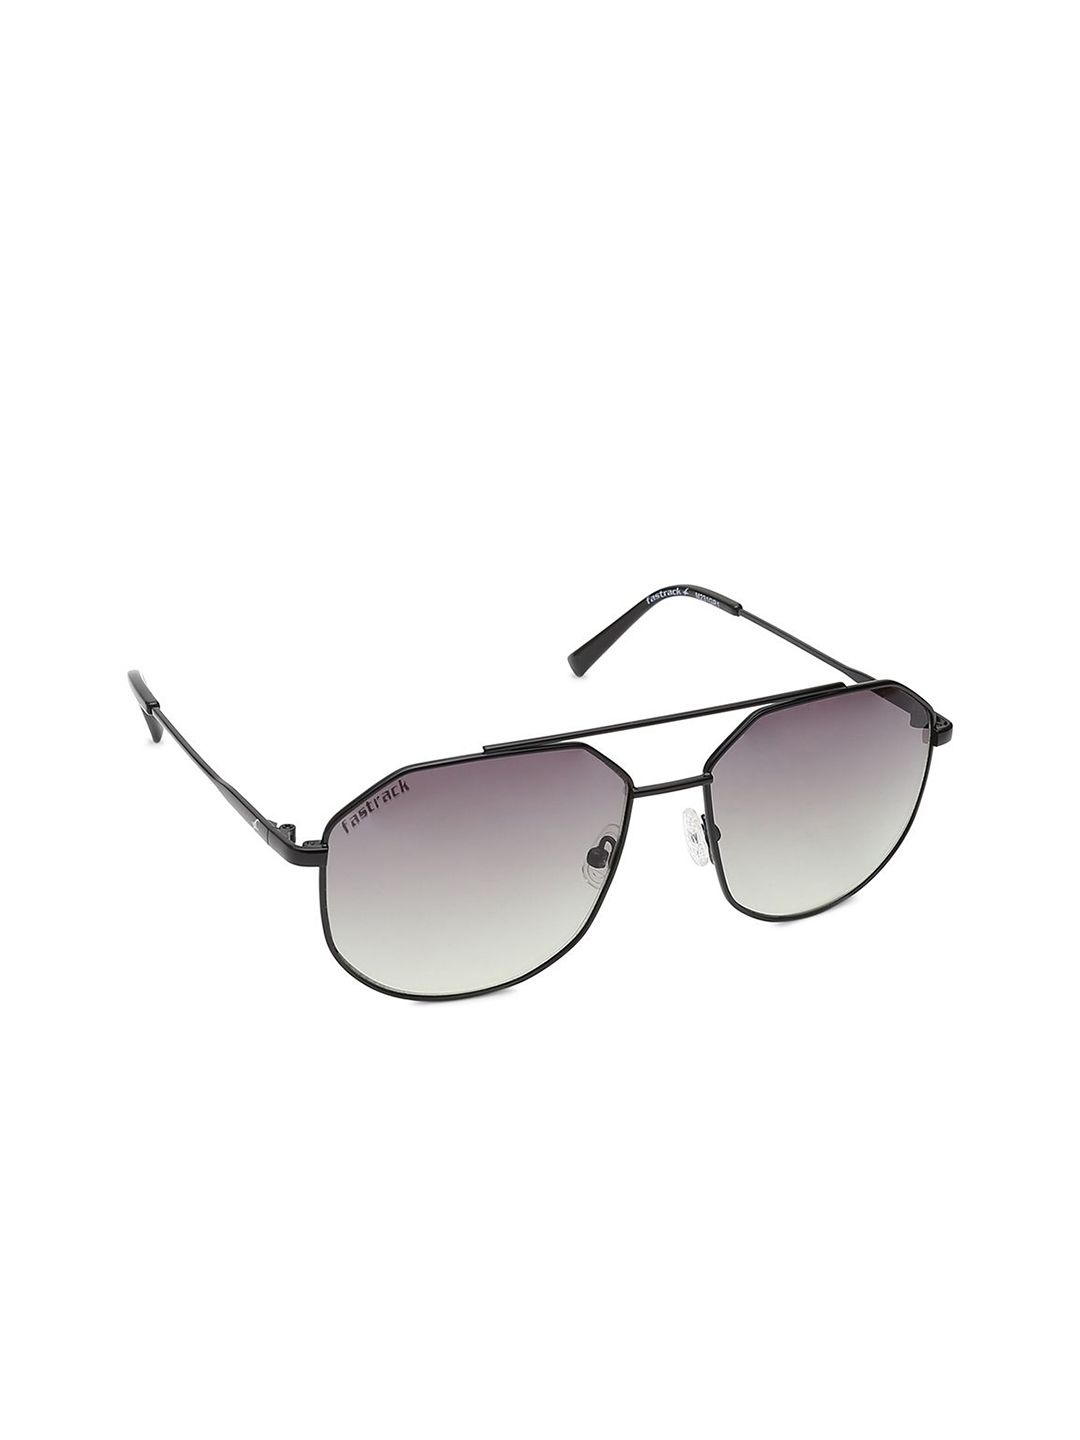 Fastrack Unisex Grey Lens & Black Oval Sunglasses with UV Protected Lens Price in India